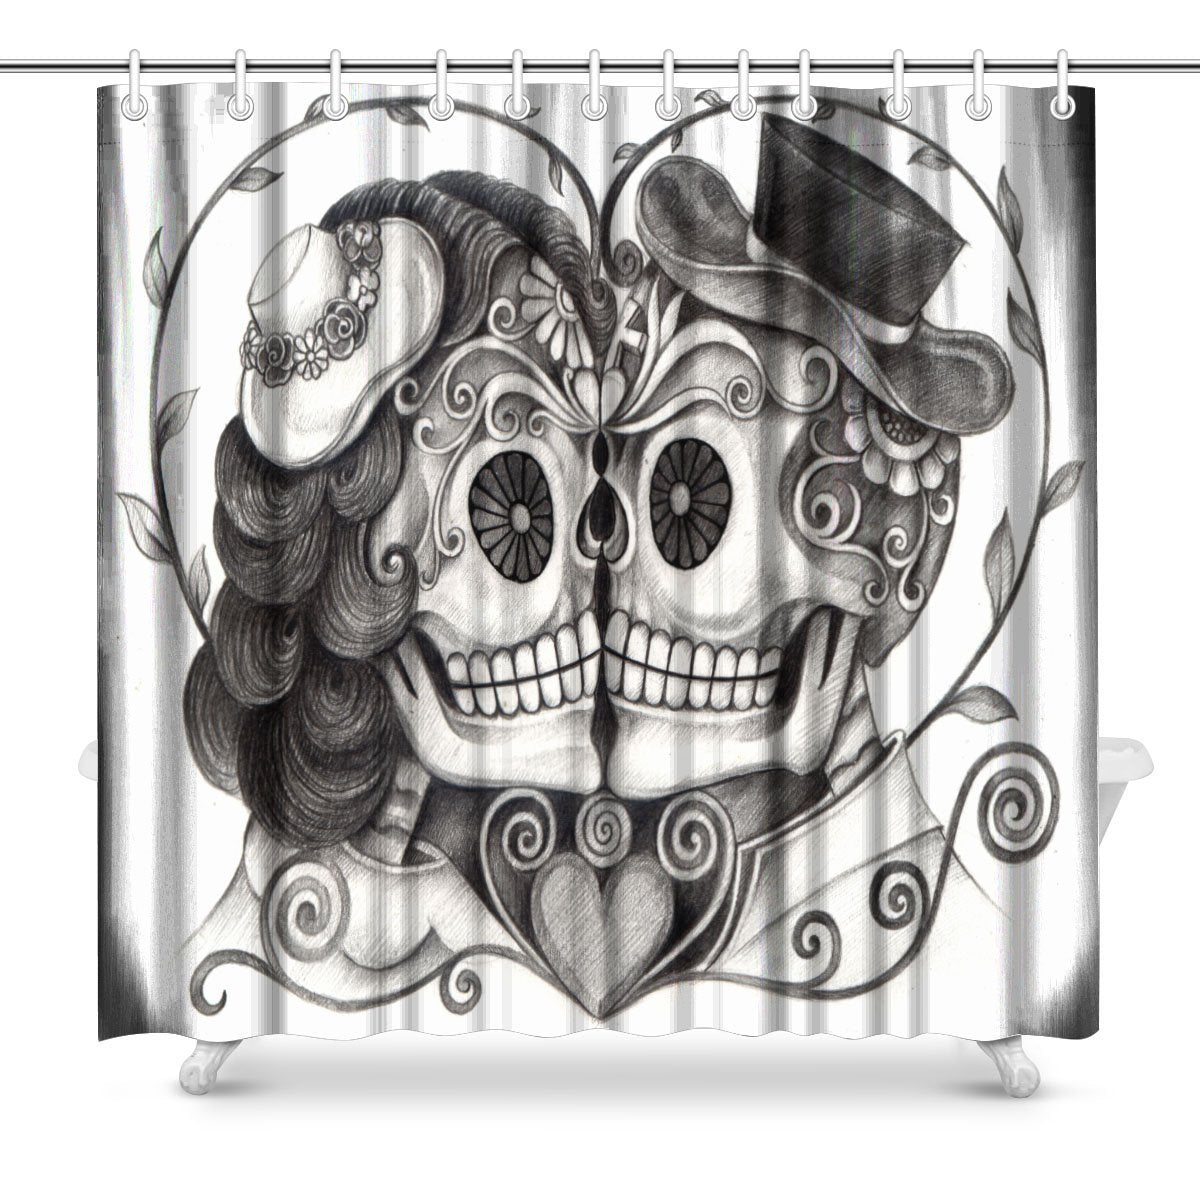 Art Skull Day of the Dead Fabric Shower Curtain Decor with Hooks,  Extra Long